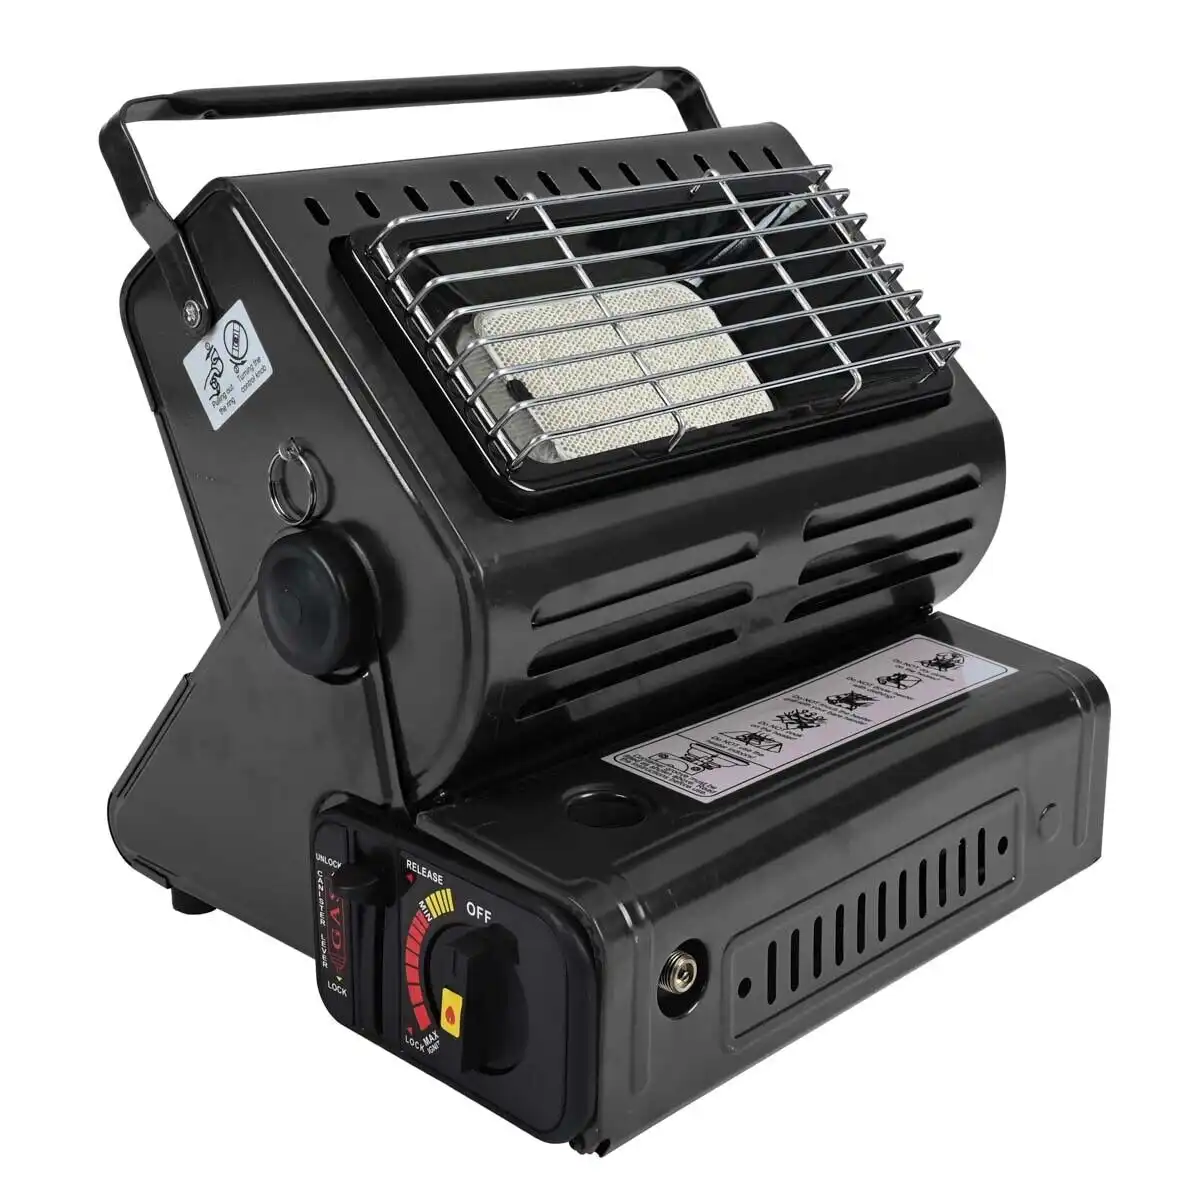 Camper Portable Butane Gas Heater for Camping Camp Tent Outdoor Hiking